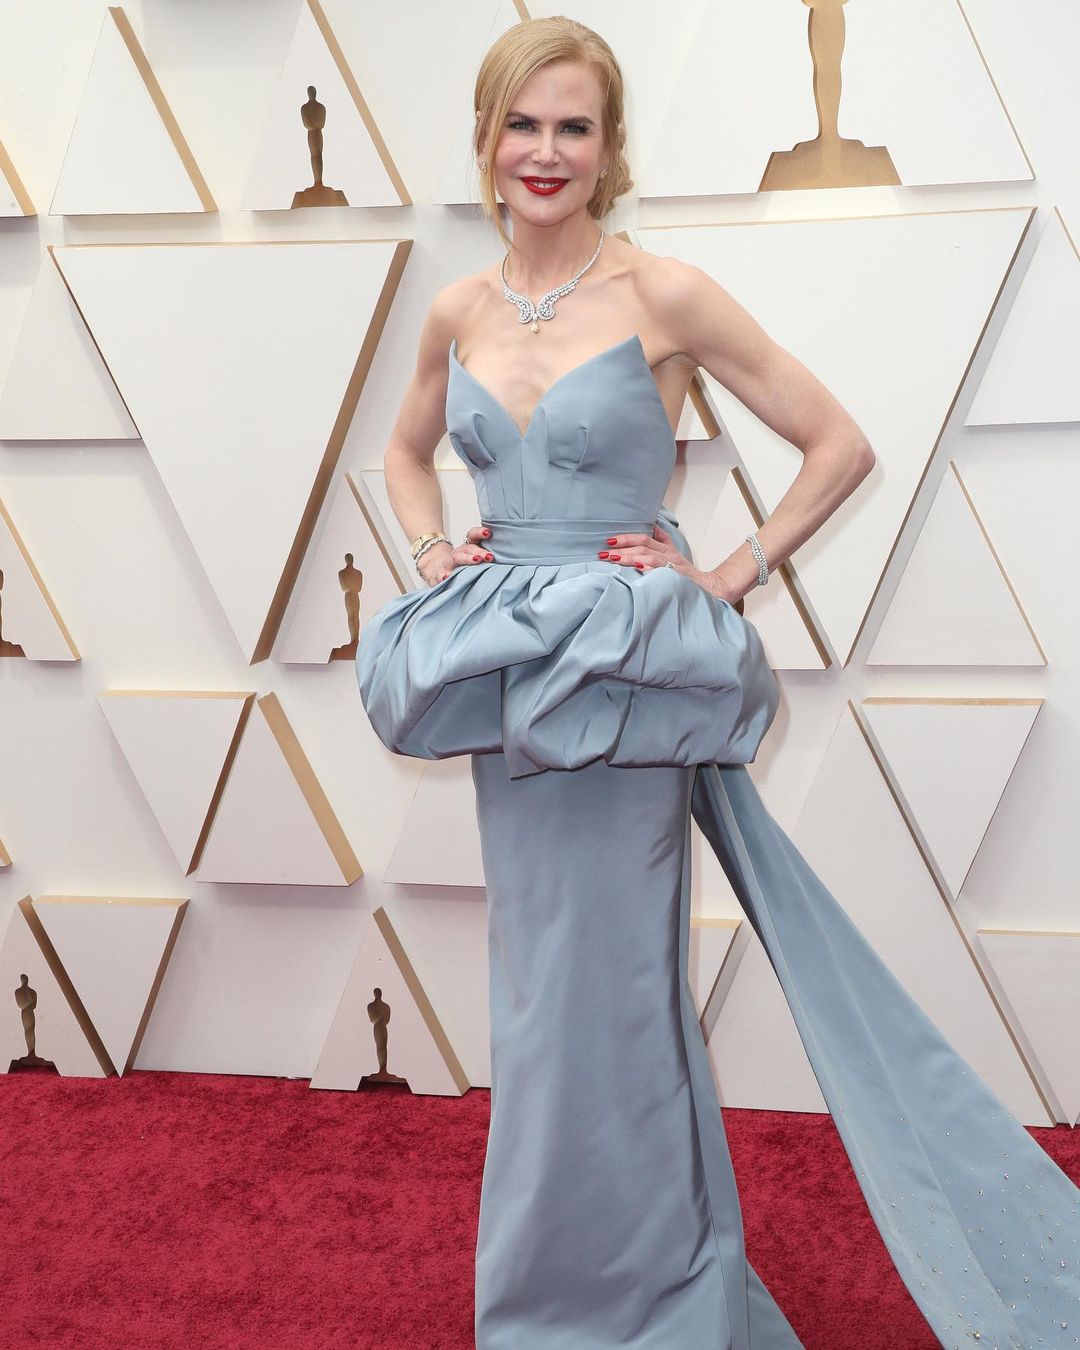 Nicole Kidman keeps it elegant in the pale blue gown by Armnai Prive